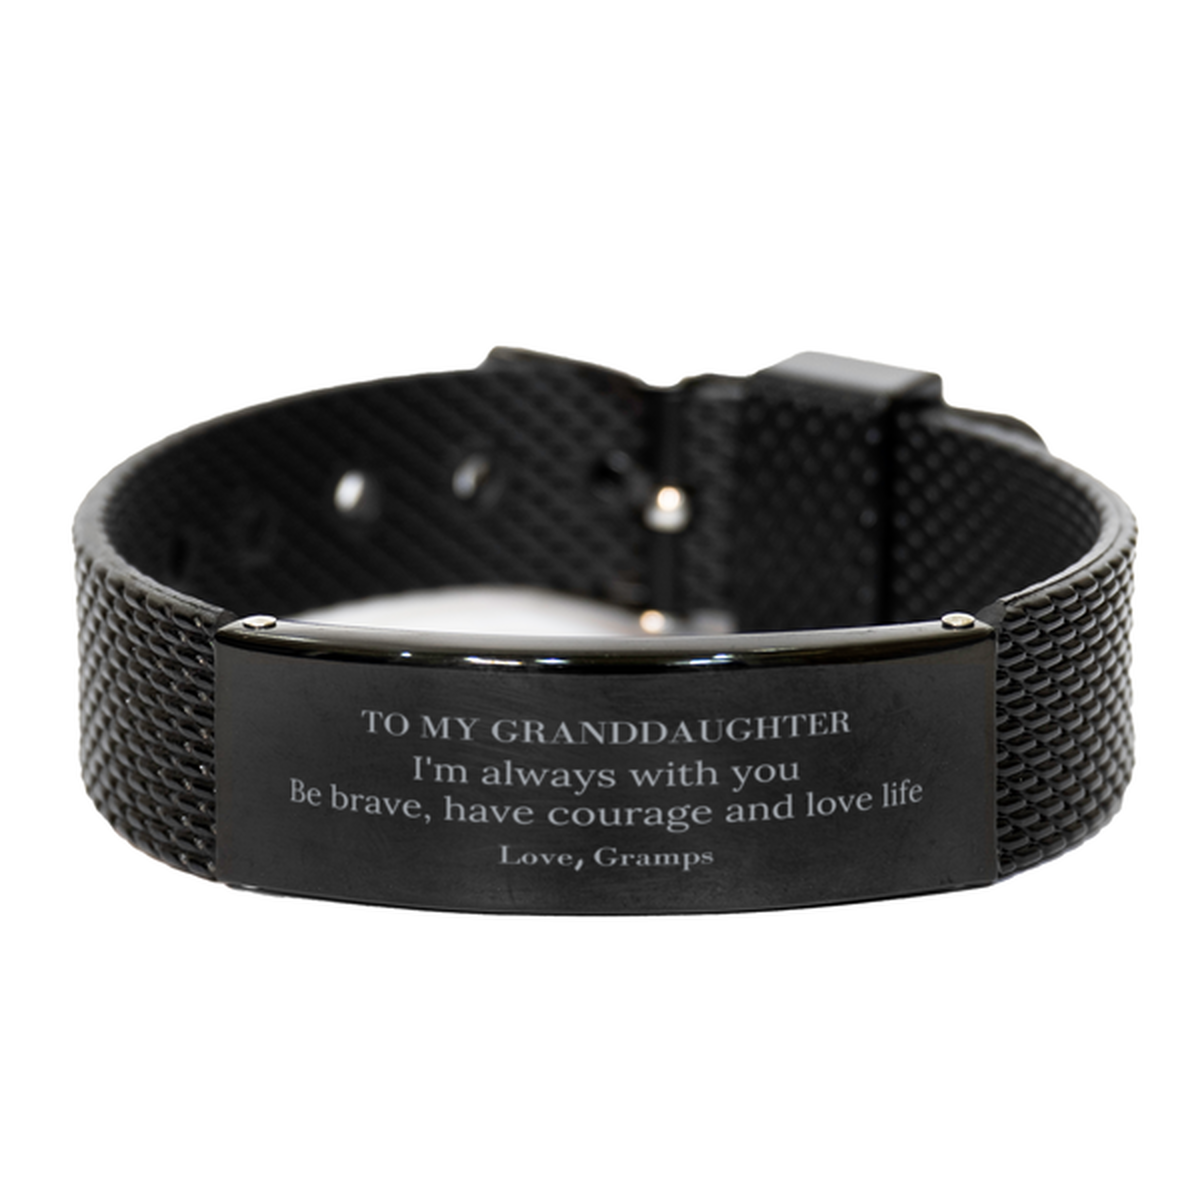 To My Granddaughter Gifts from Gramps, Unique Black Shark Mesh Bracelet Inspirational Christmas Birthday Graduation Gifts for Granddaughter I'm always with you. Be brave, have courage and love life. Love, Gramps